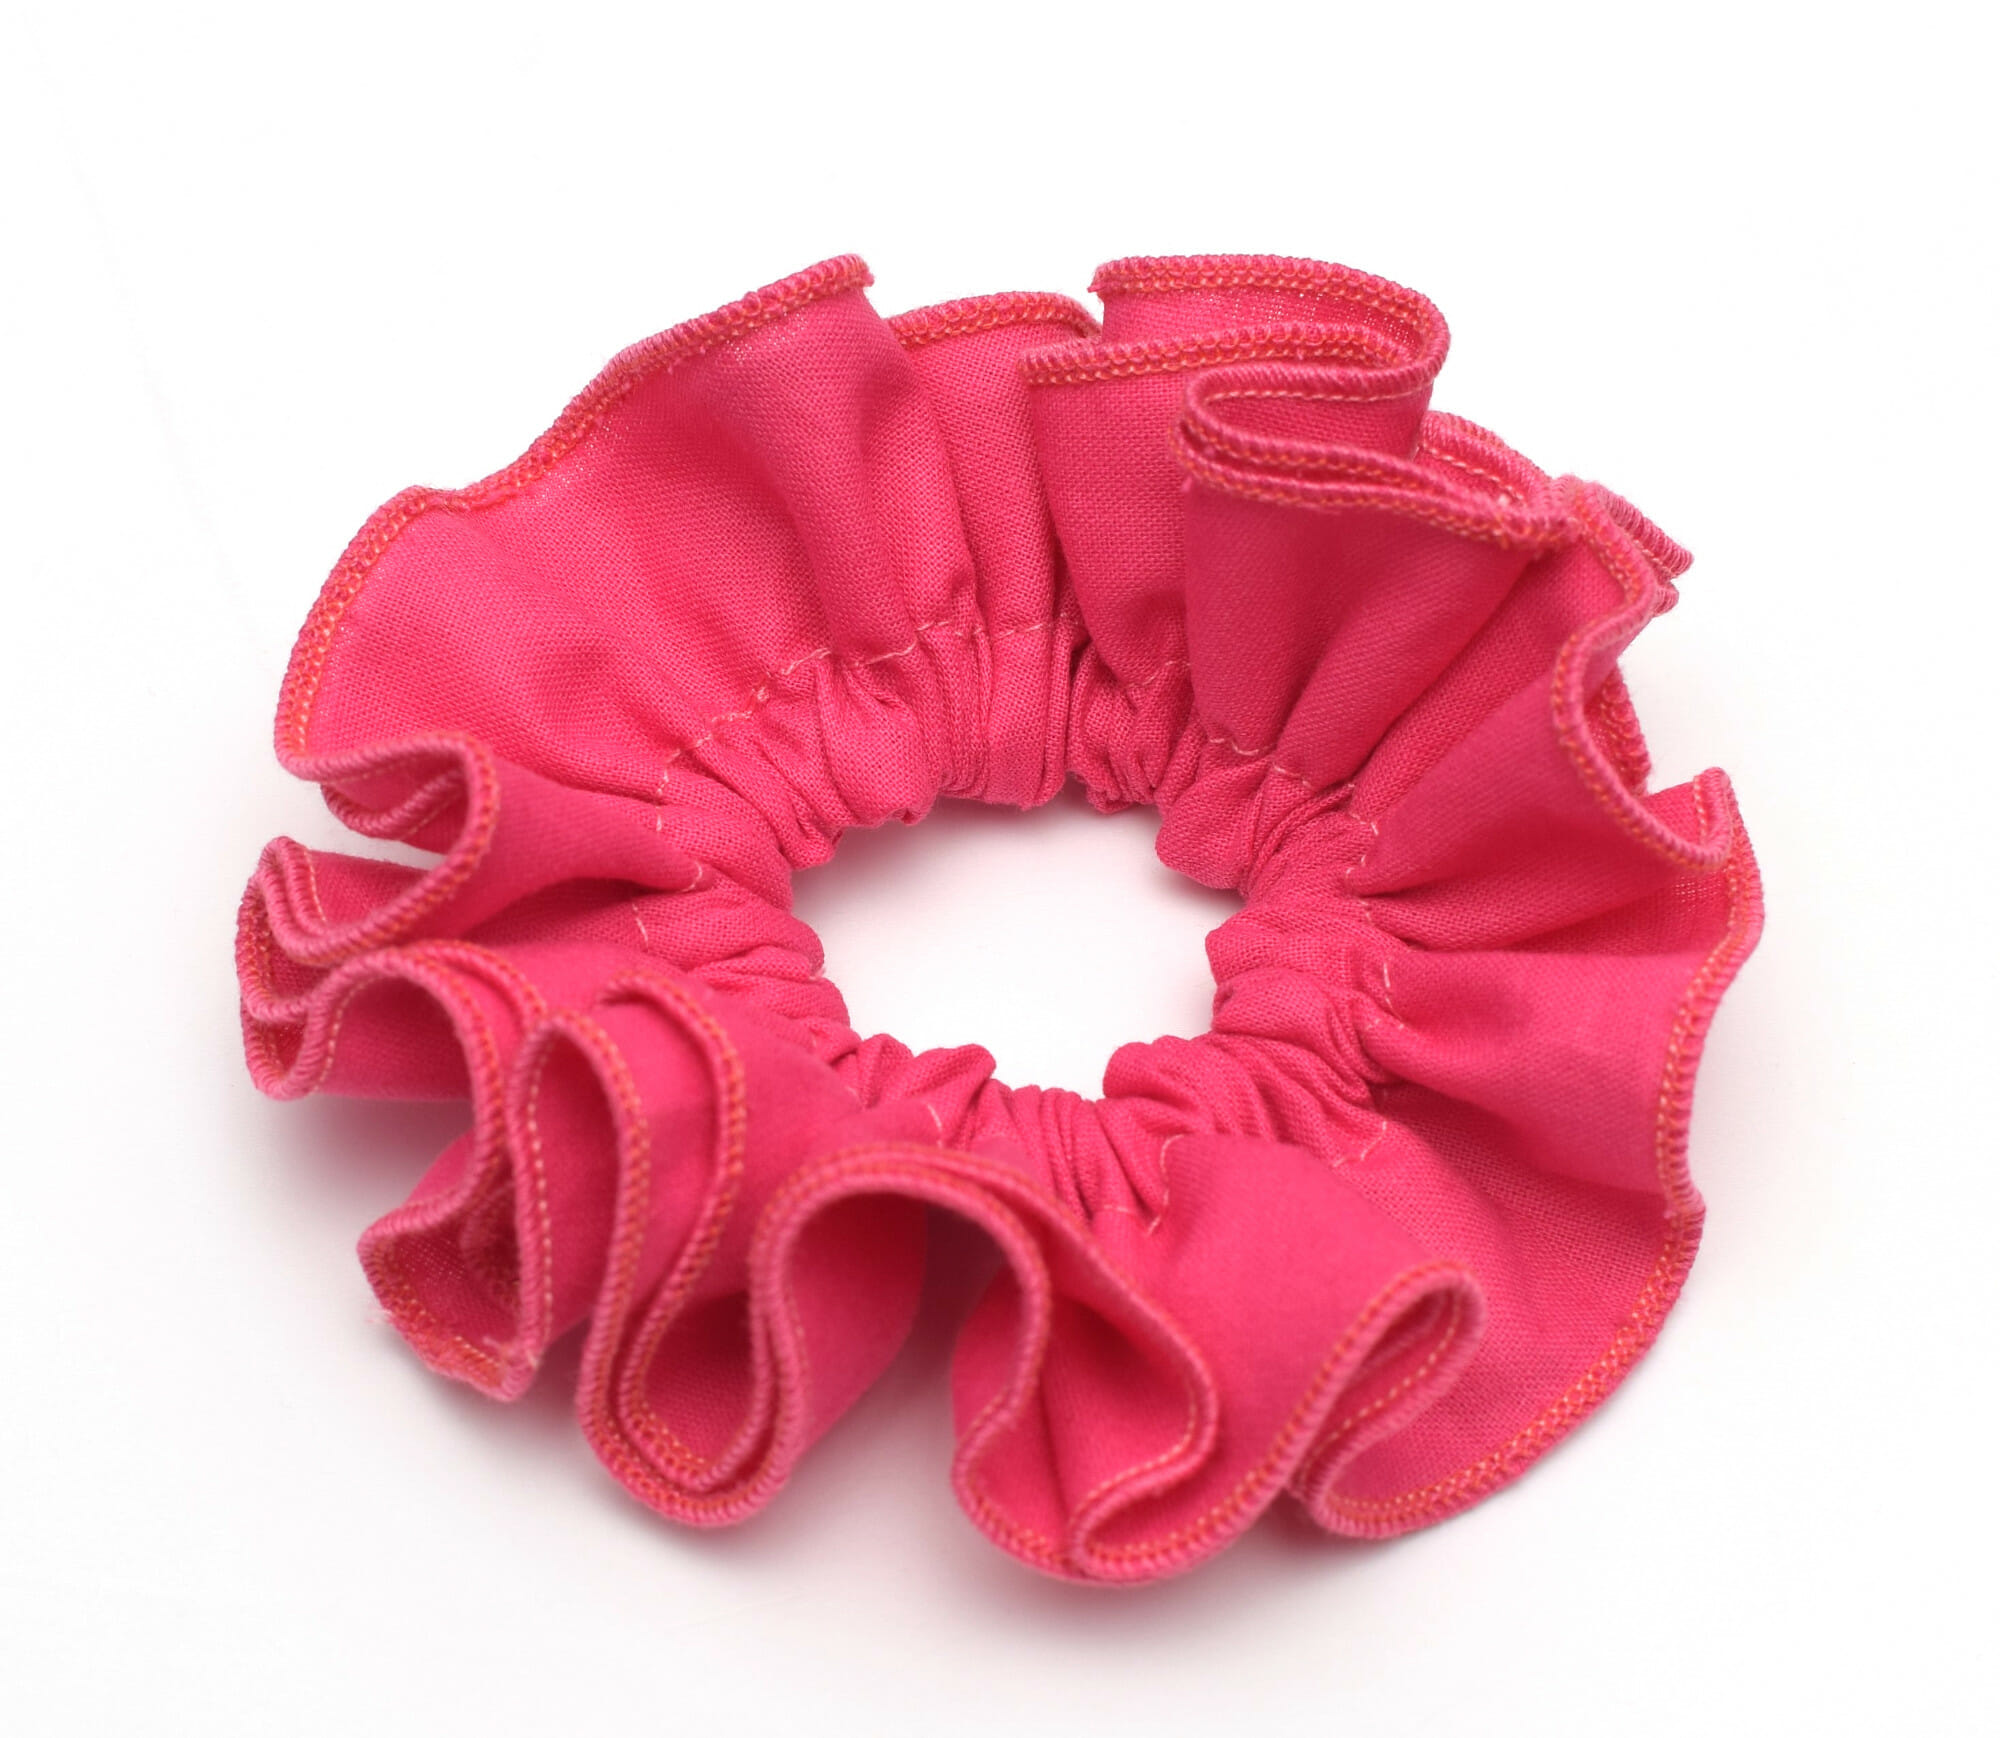 How to make DIY ruffled scrunchies - I Can Sew This